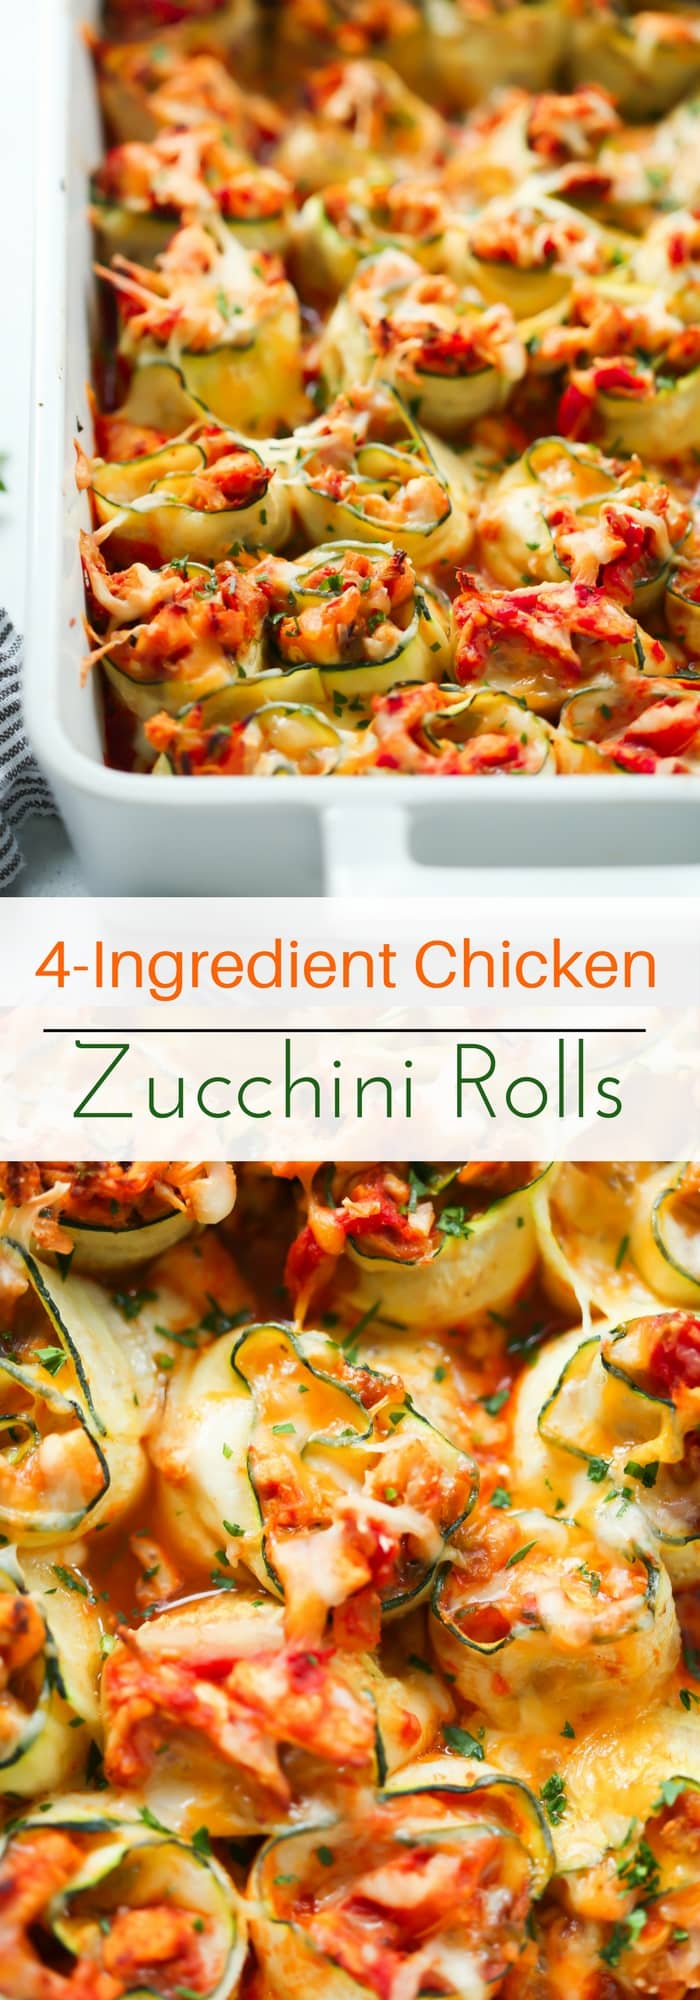 4-Ingredient Chicken Zucchini Rolls - These 4-Ingredient Chicken Zucchini Rolls make a super easy, healthy and delicious dinner for the whole family! It's gluten-free and low-carb! Enjoy! 